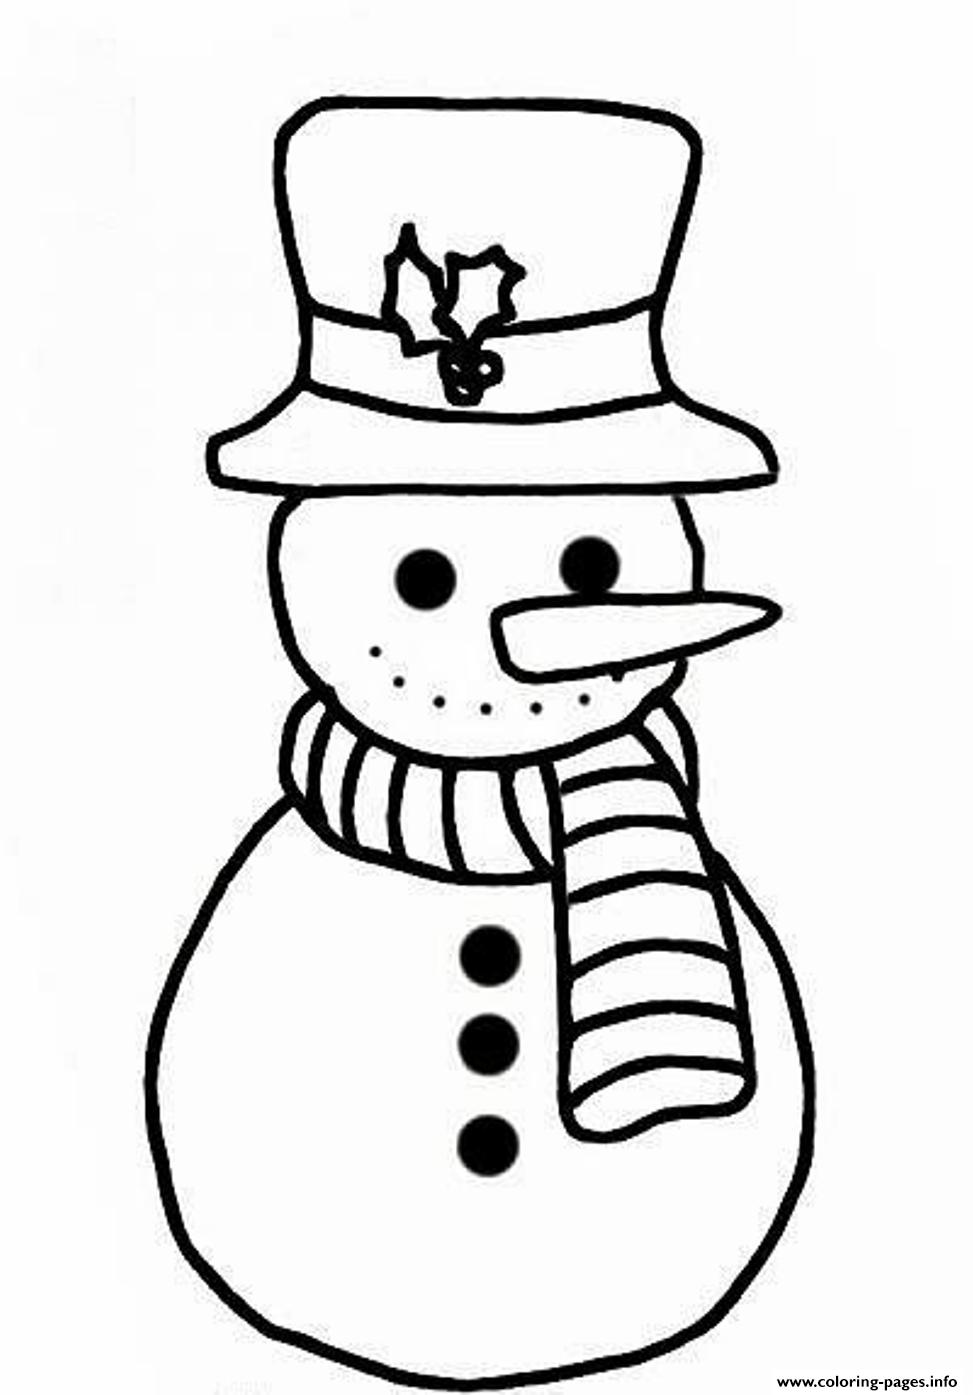 Snowman S For Kids Free15cb0 coloring